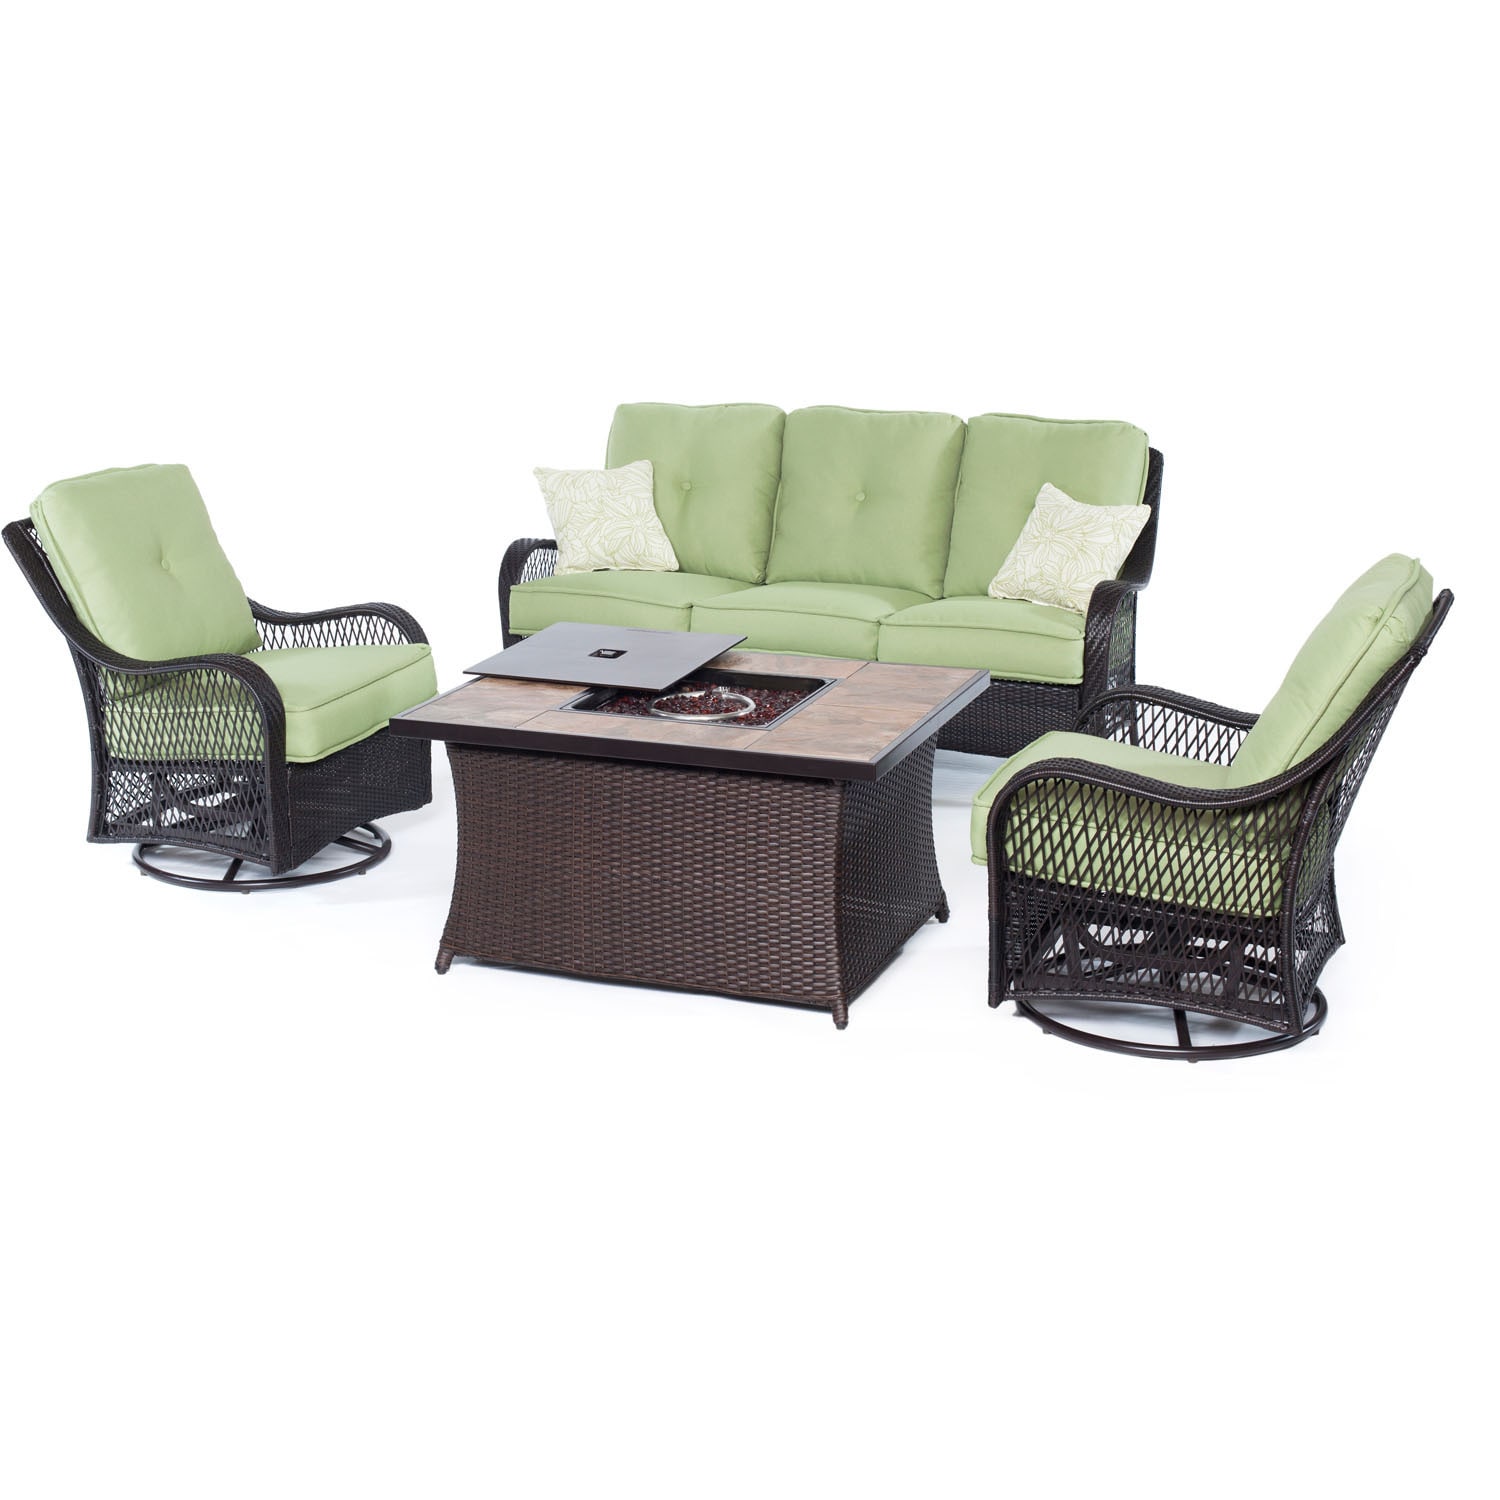 Hanover Outdoor Orleans 4-piece Woven Lounge Set With Fire Pit Table In Avocado Green